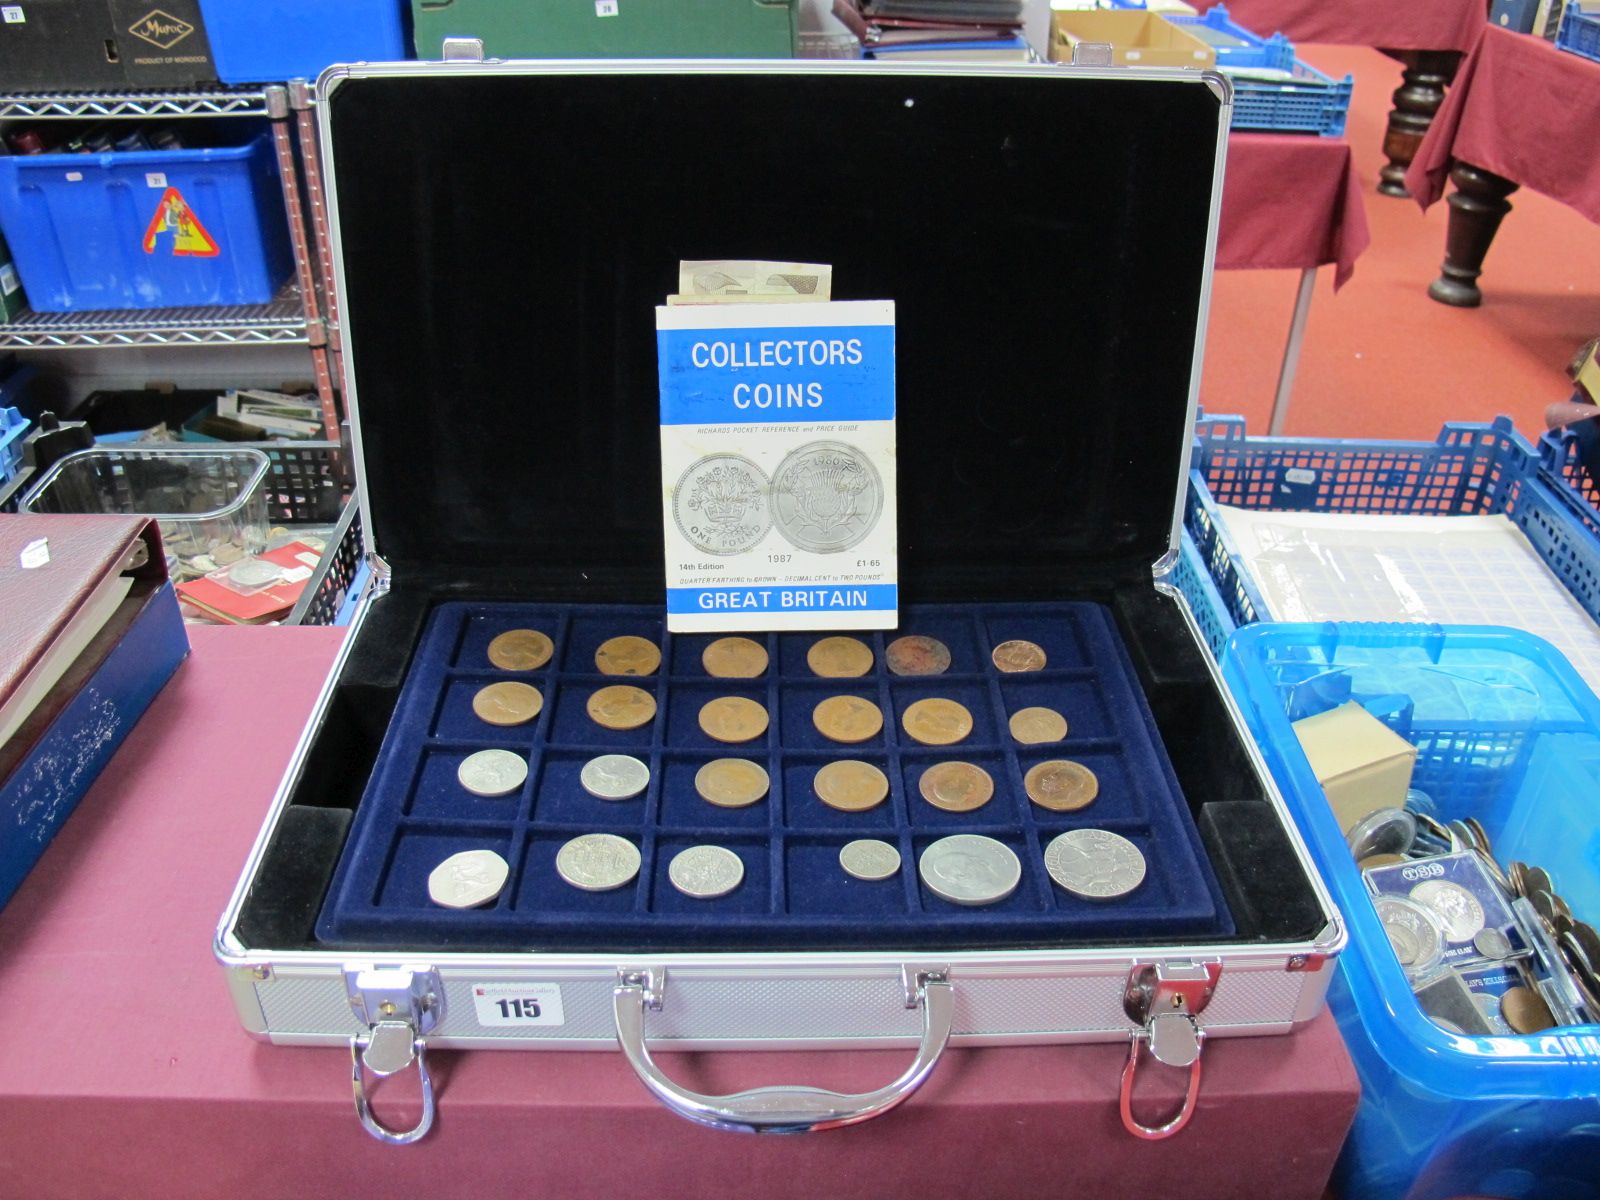 A Small Quantity of G.B. Coinage, some pre-1947 silver coins noted, a circulated Government of